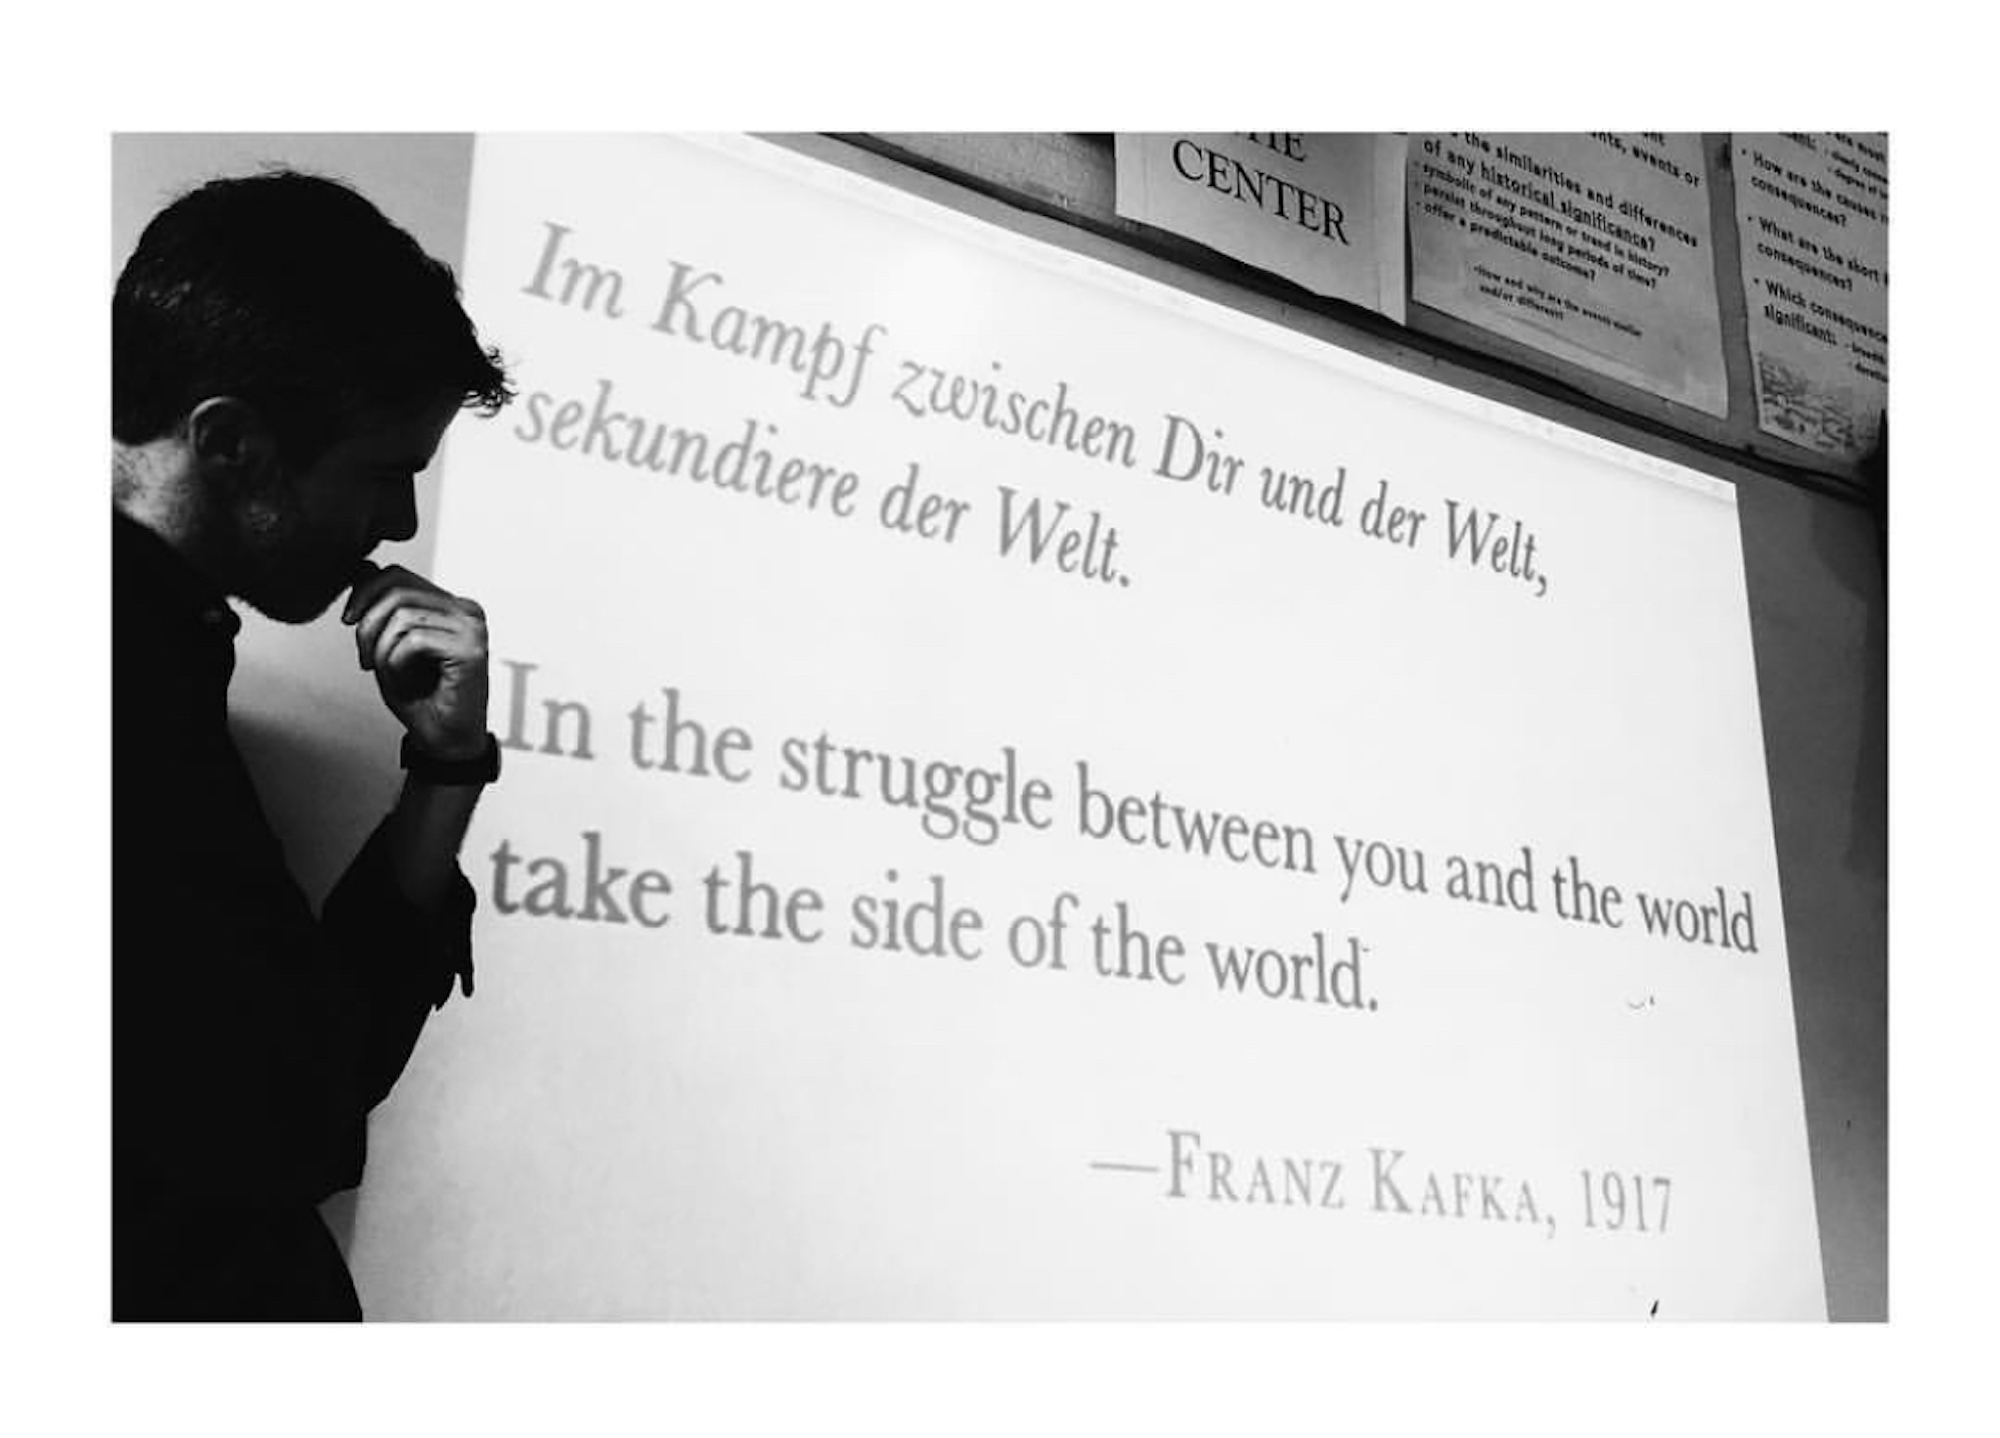 Kafka and punk rock, a match made in history classes. (Photo courtesy of Patrick Flynn)